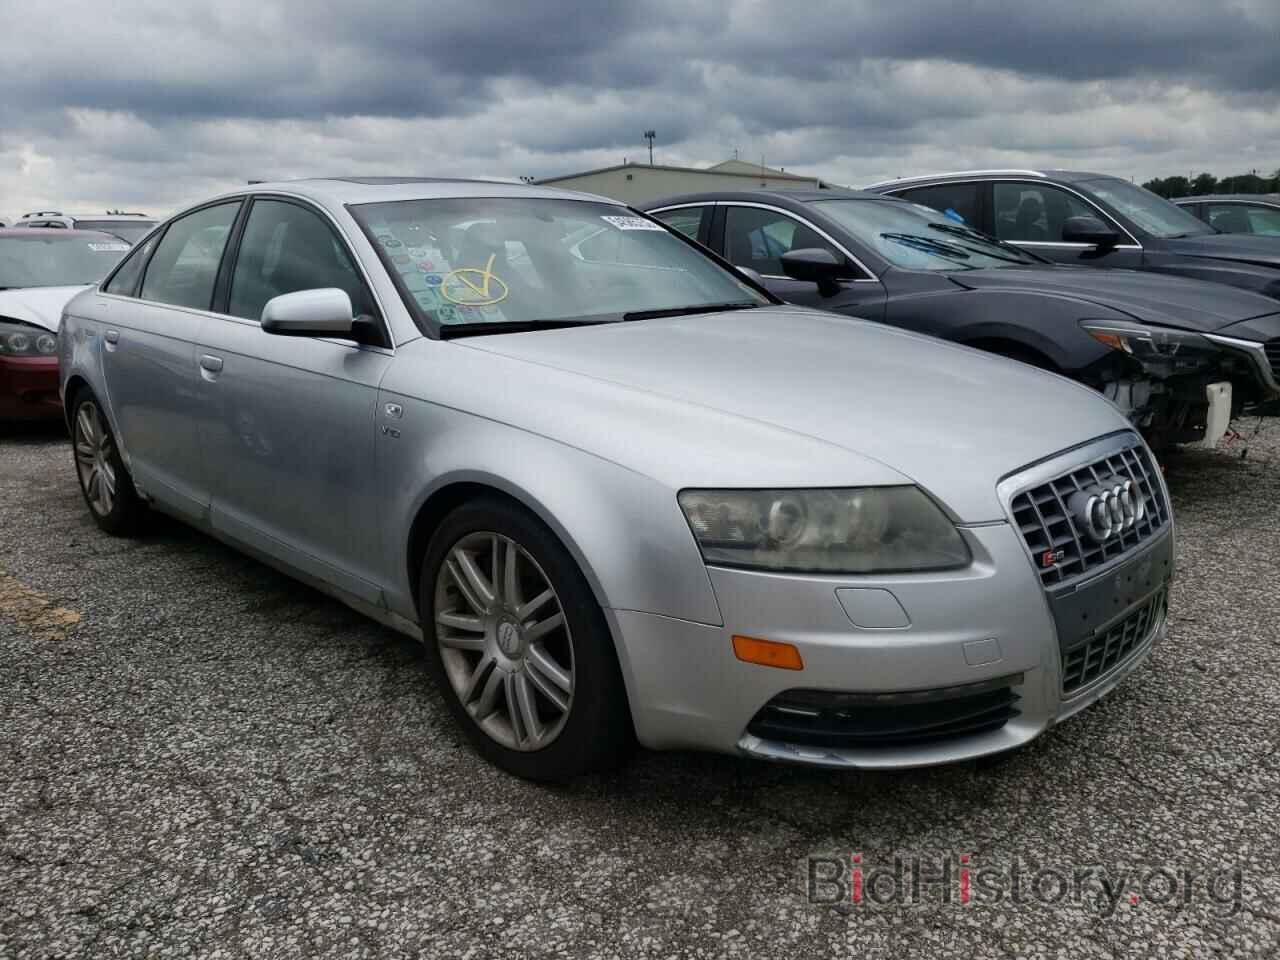 Photo WAUGN74F97N134975 - AUDI S6/RS6 2007